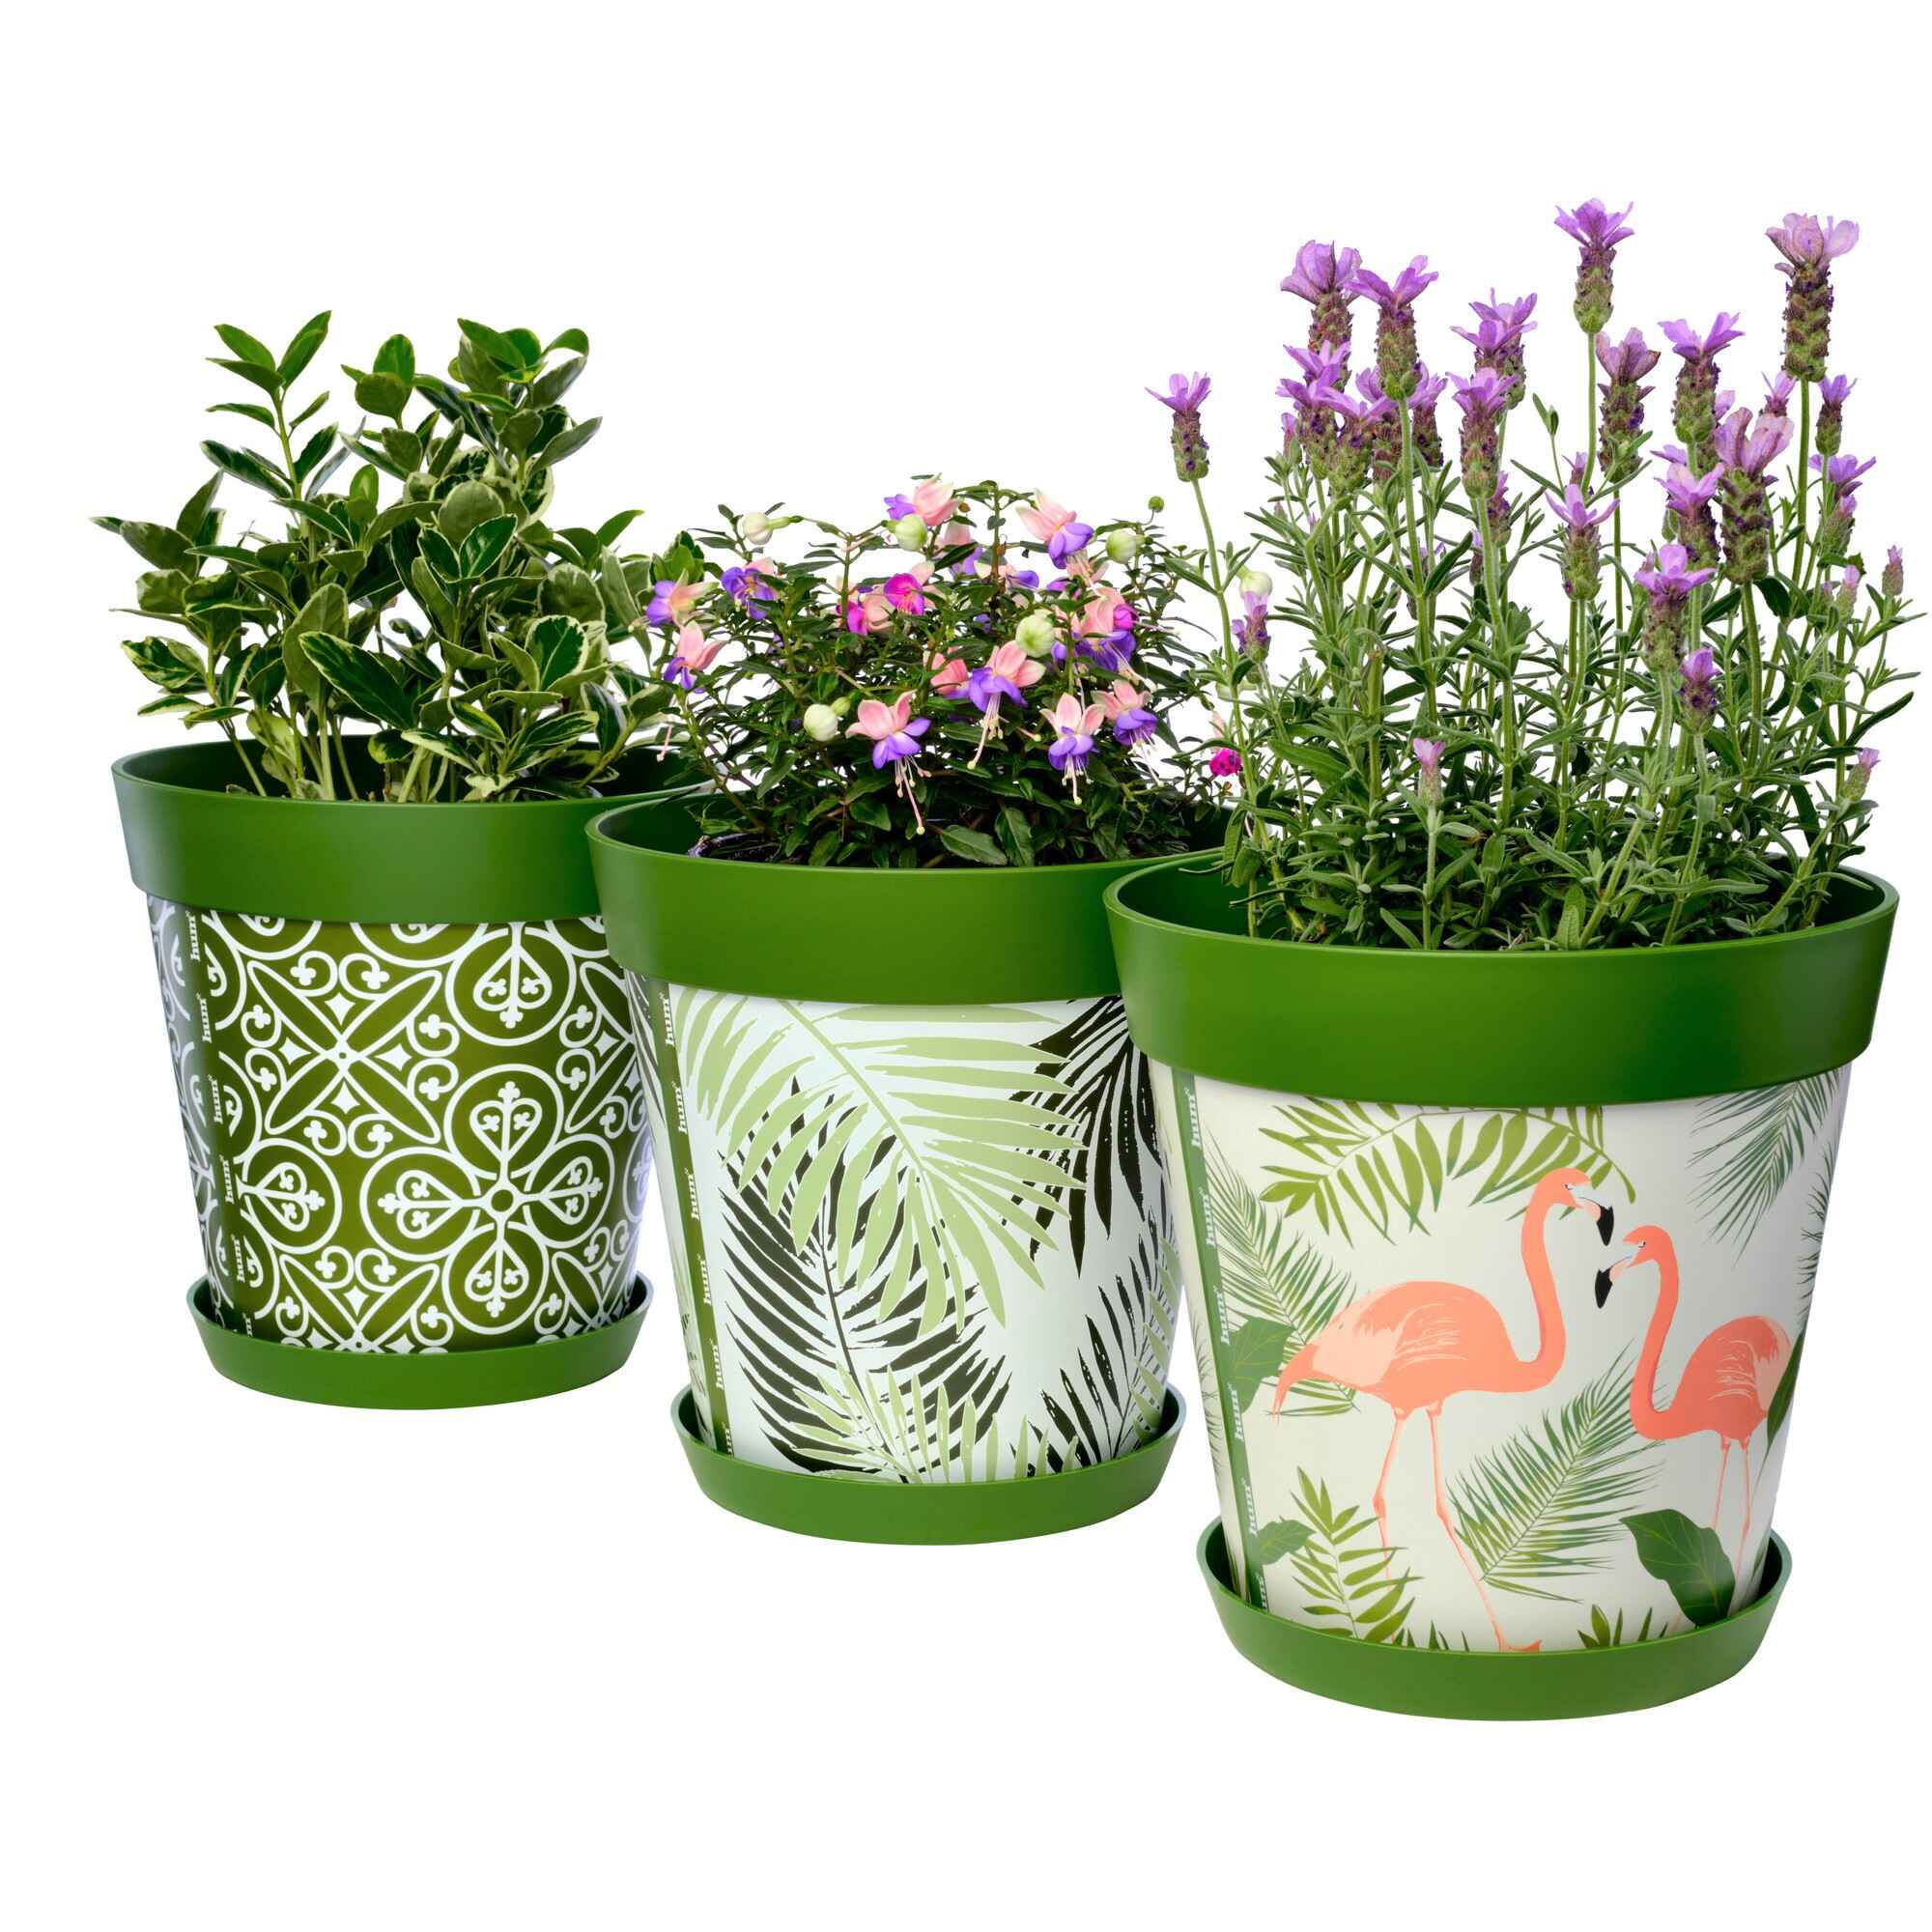 Picture of 3 Planted Large 25cm Green Mixed Pattern Indoor/Outdoor Flower Pot and Saucers